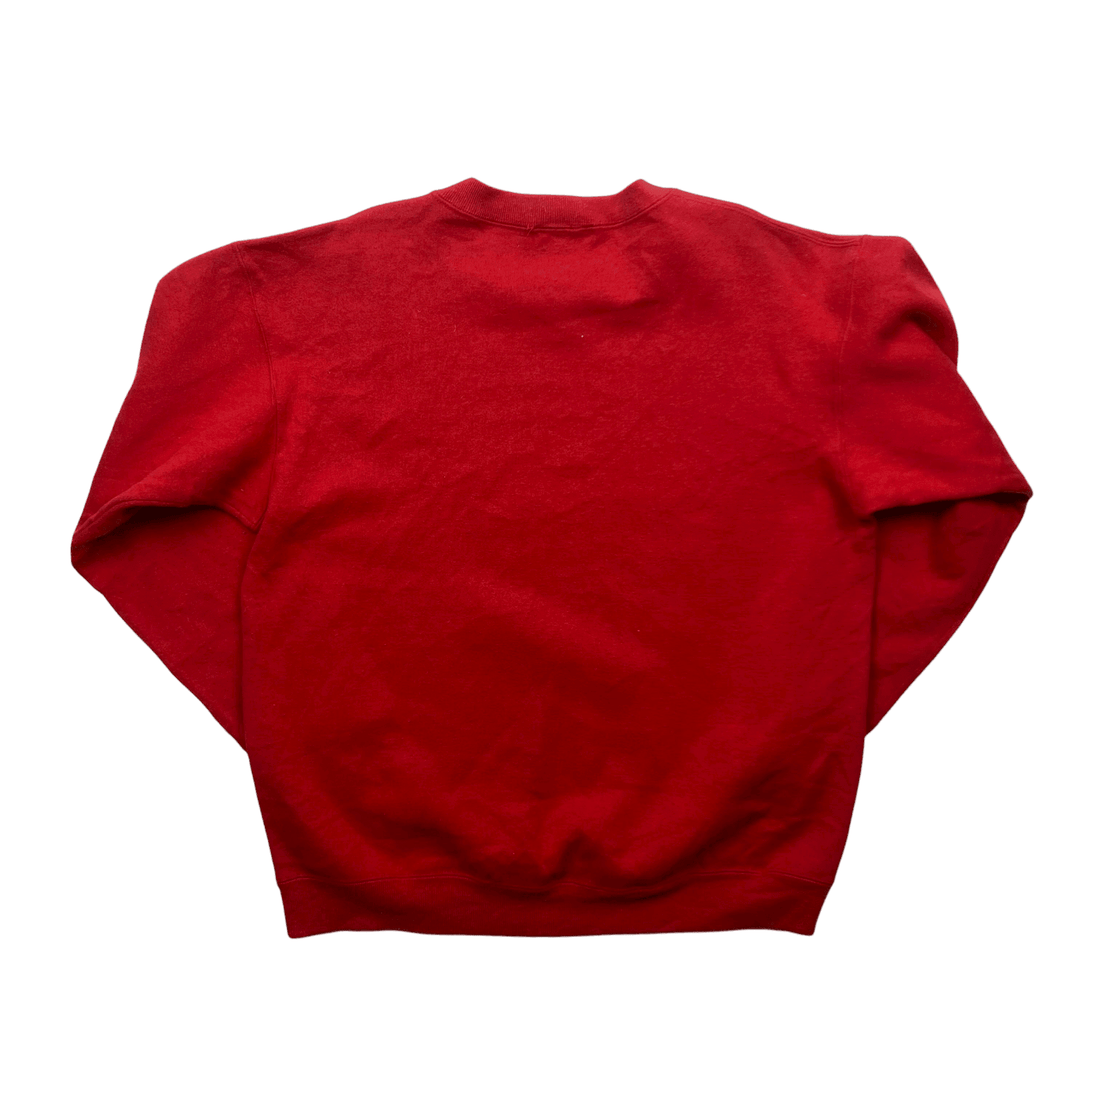 Vintage 90s Red Nutmeg Chicago Bulls Spell-Out Sweatshirt - Large (Recommended Size - Medium) - The Streetwear Studio